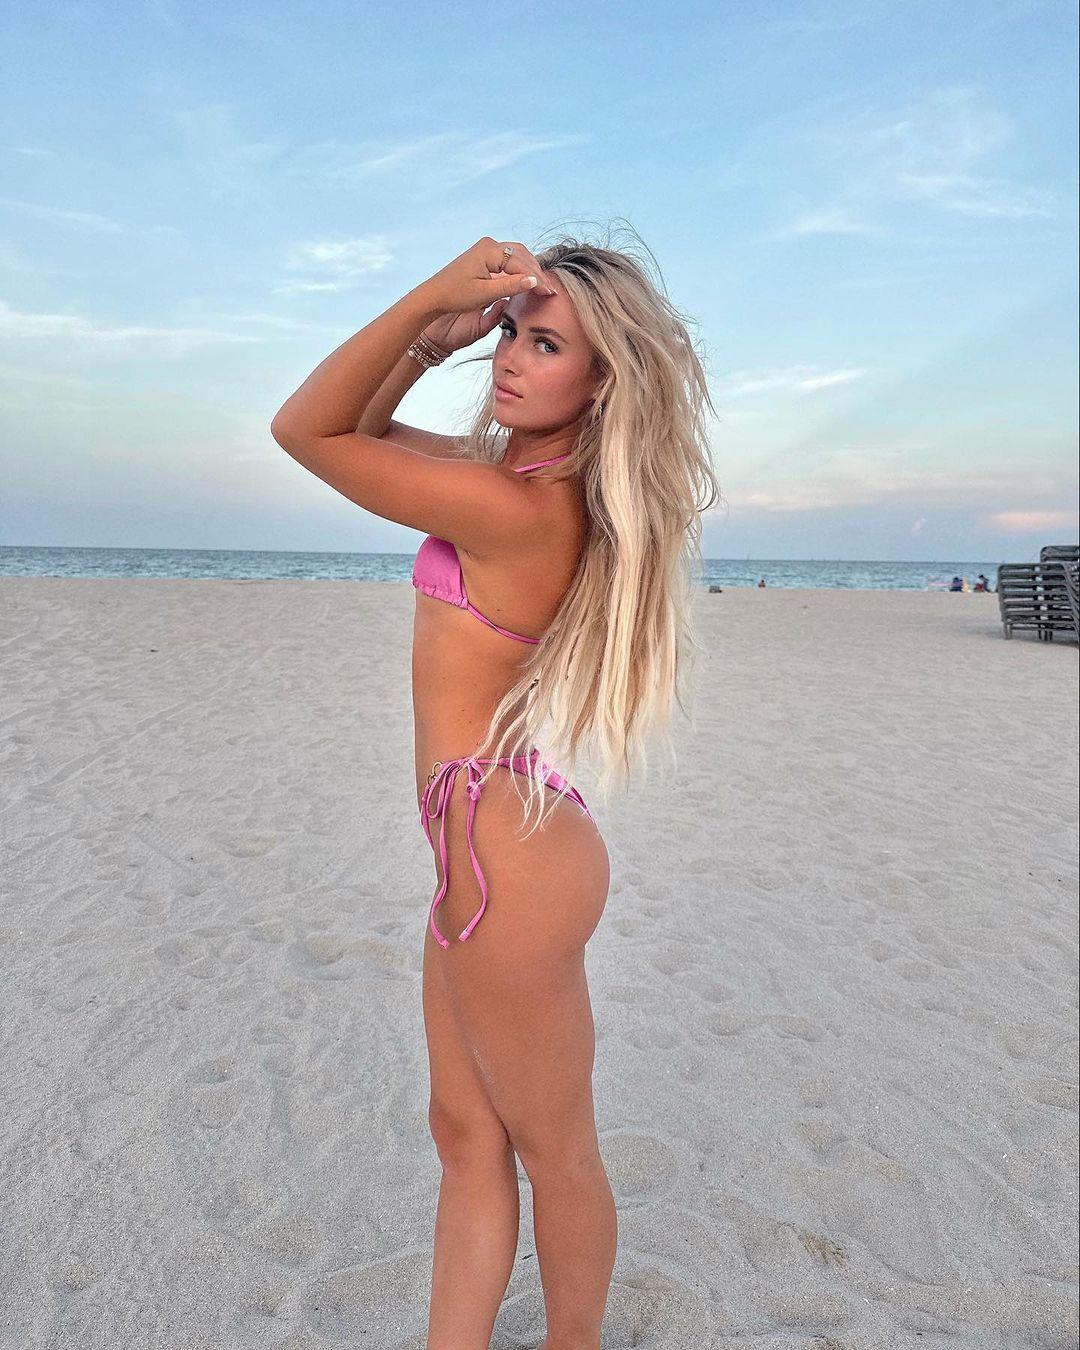 Brylie St. Clair strikes a pose at the beach in her pink bikini.